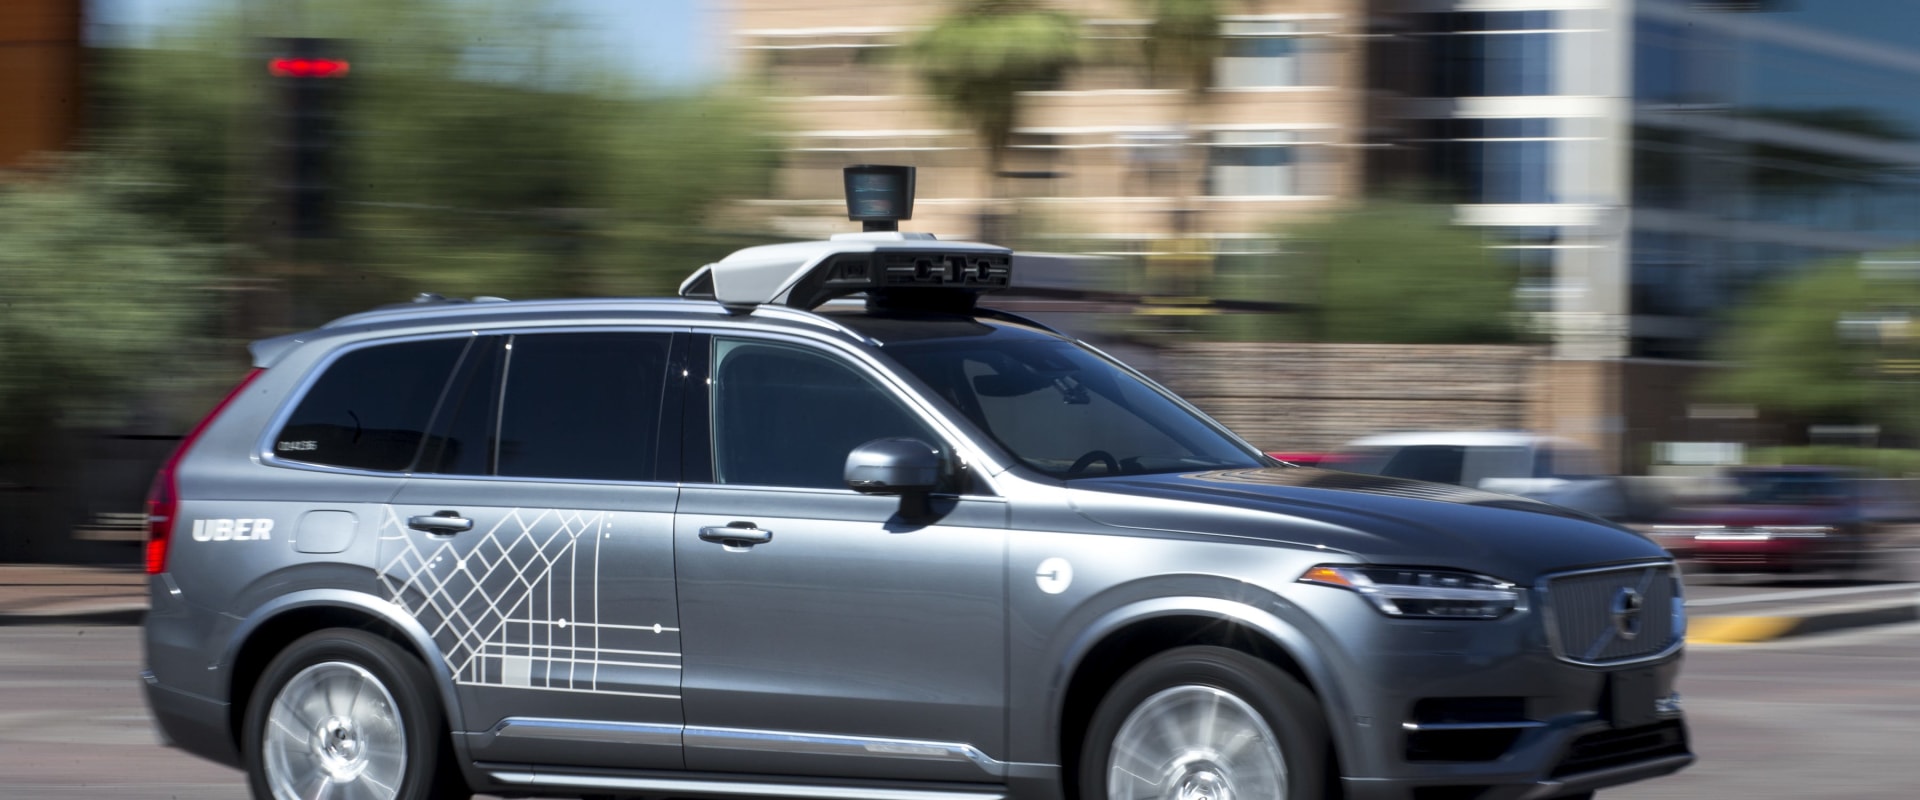 Impact of New Regulations on Reducing Uber Accidents in Arizona